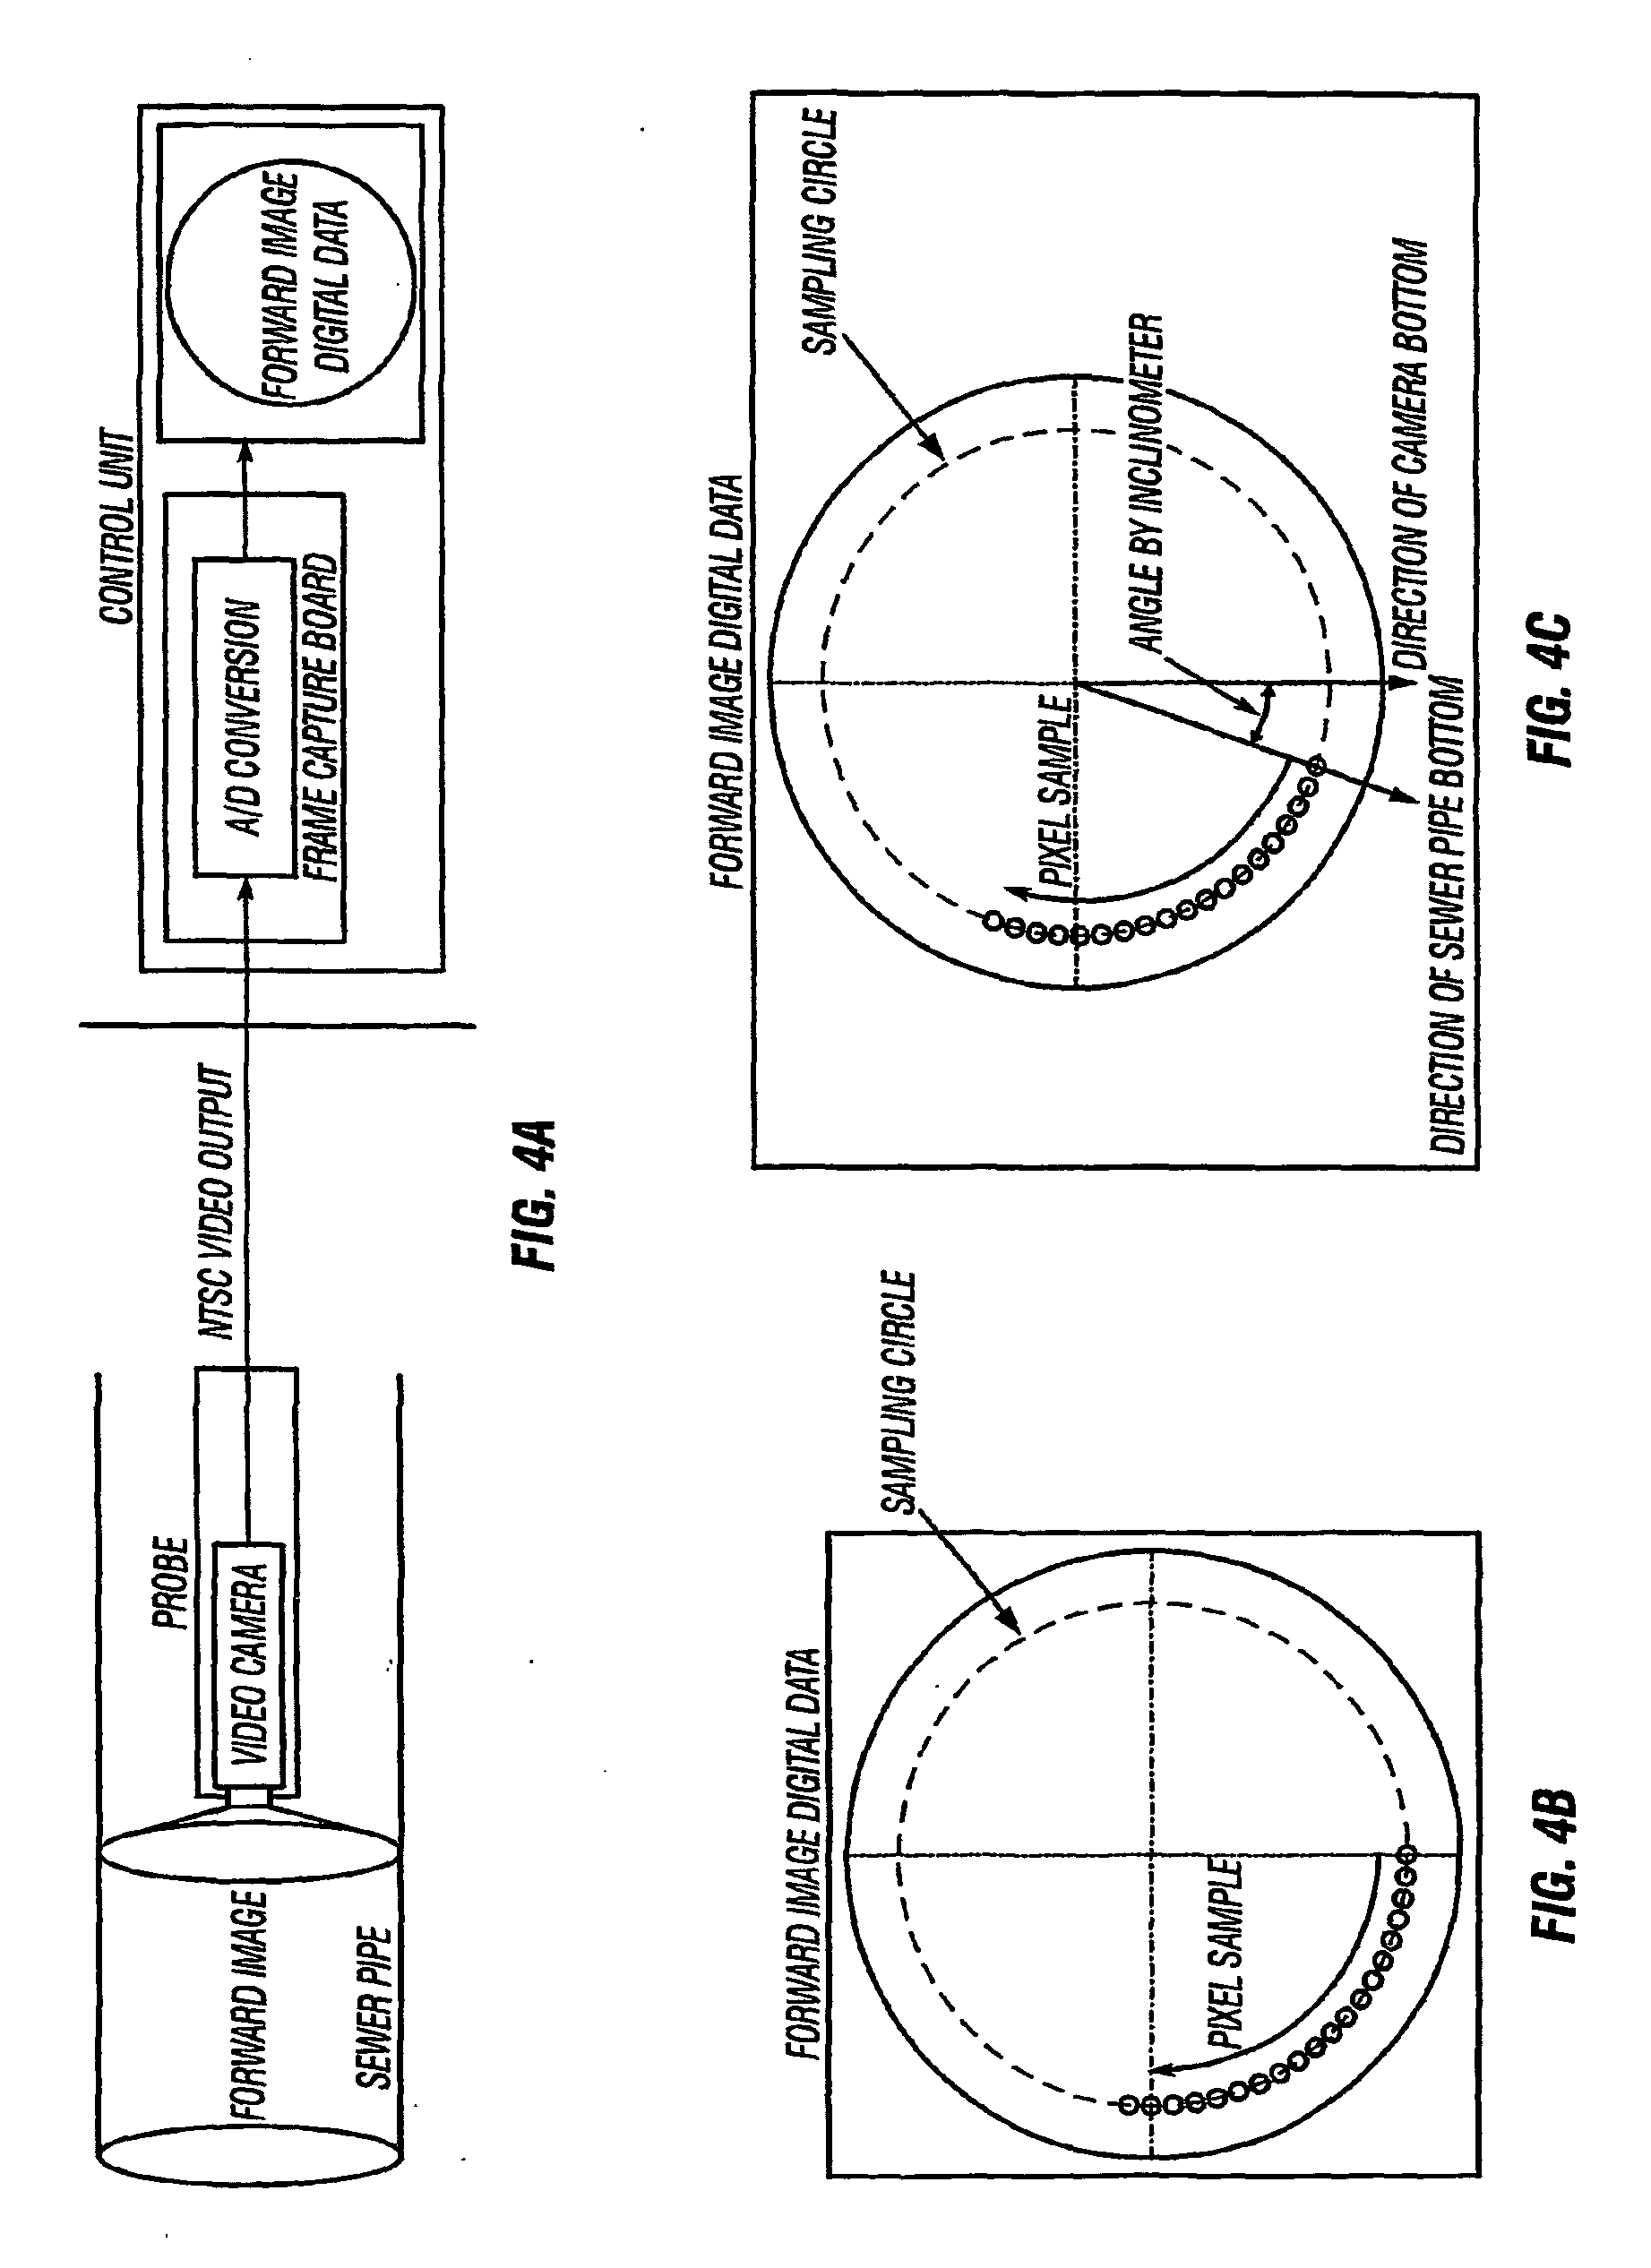 Apparatus and method for detecting pipelwe defects